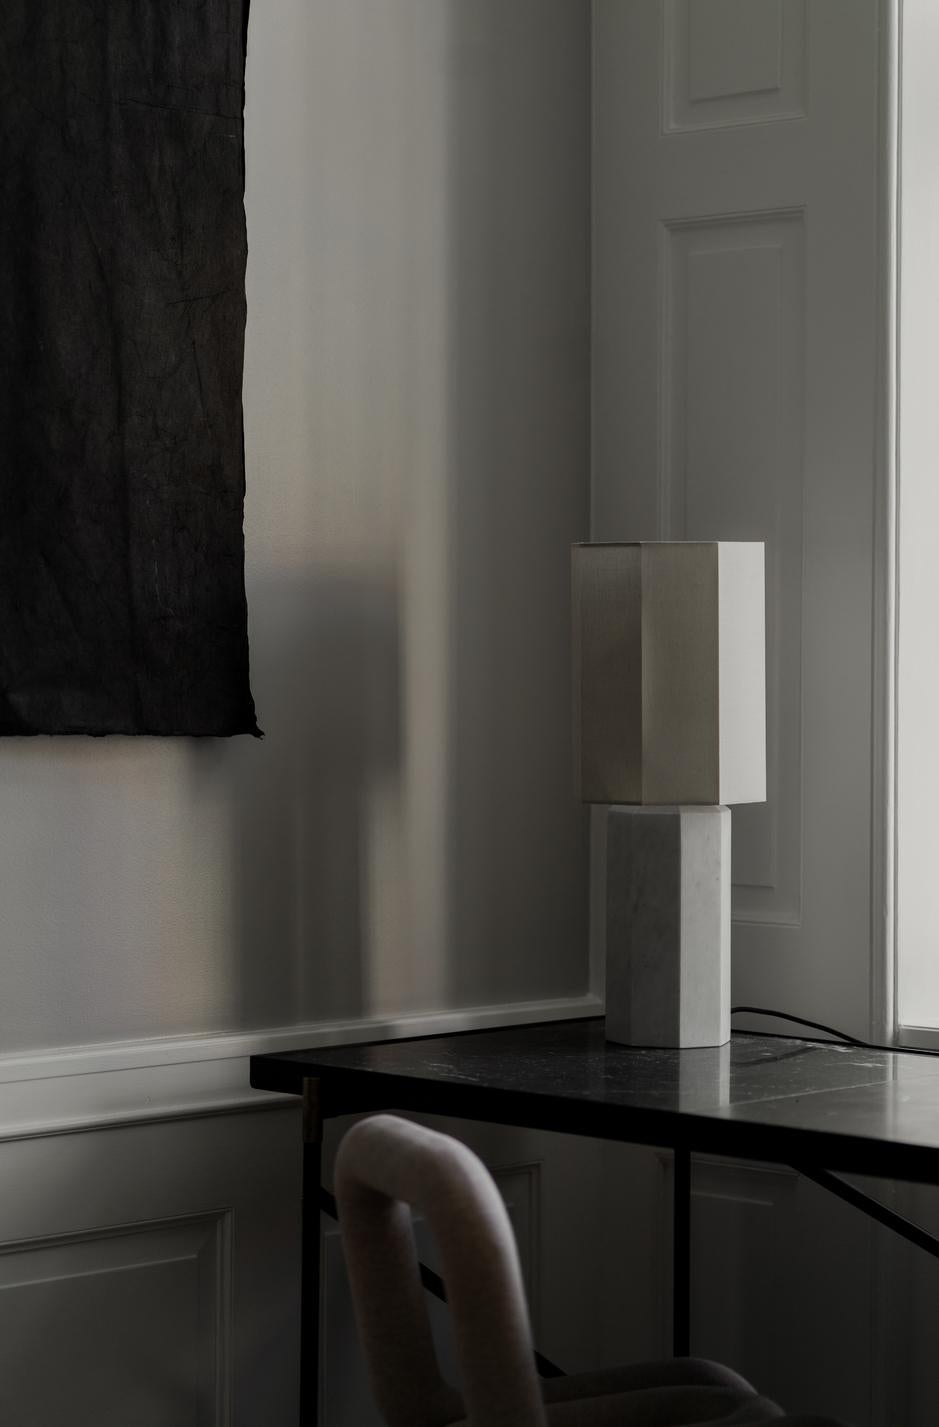 Table lamp 'The Eight over Eight' by Louise Roe 

Designed in Denmark and manufactured in Italy.

Model shown in the picture: 
Base: Black marble
Lampshade: Ocher 

Dimensions : 
Height: 36 cm
Diameter: 12.5 cm

Louise Roe is a